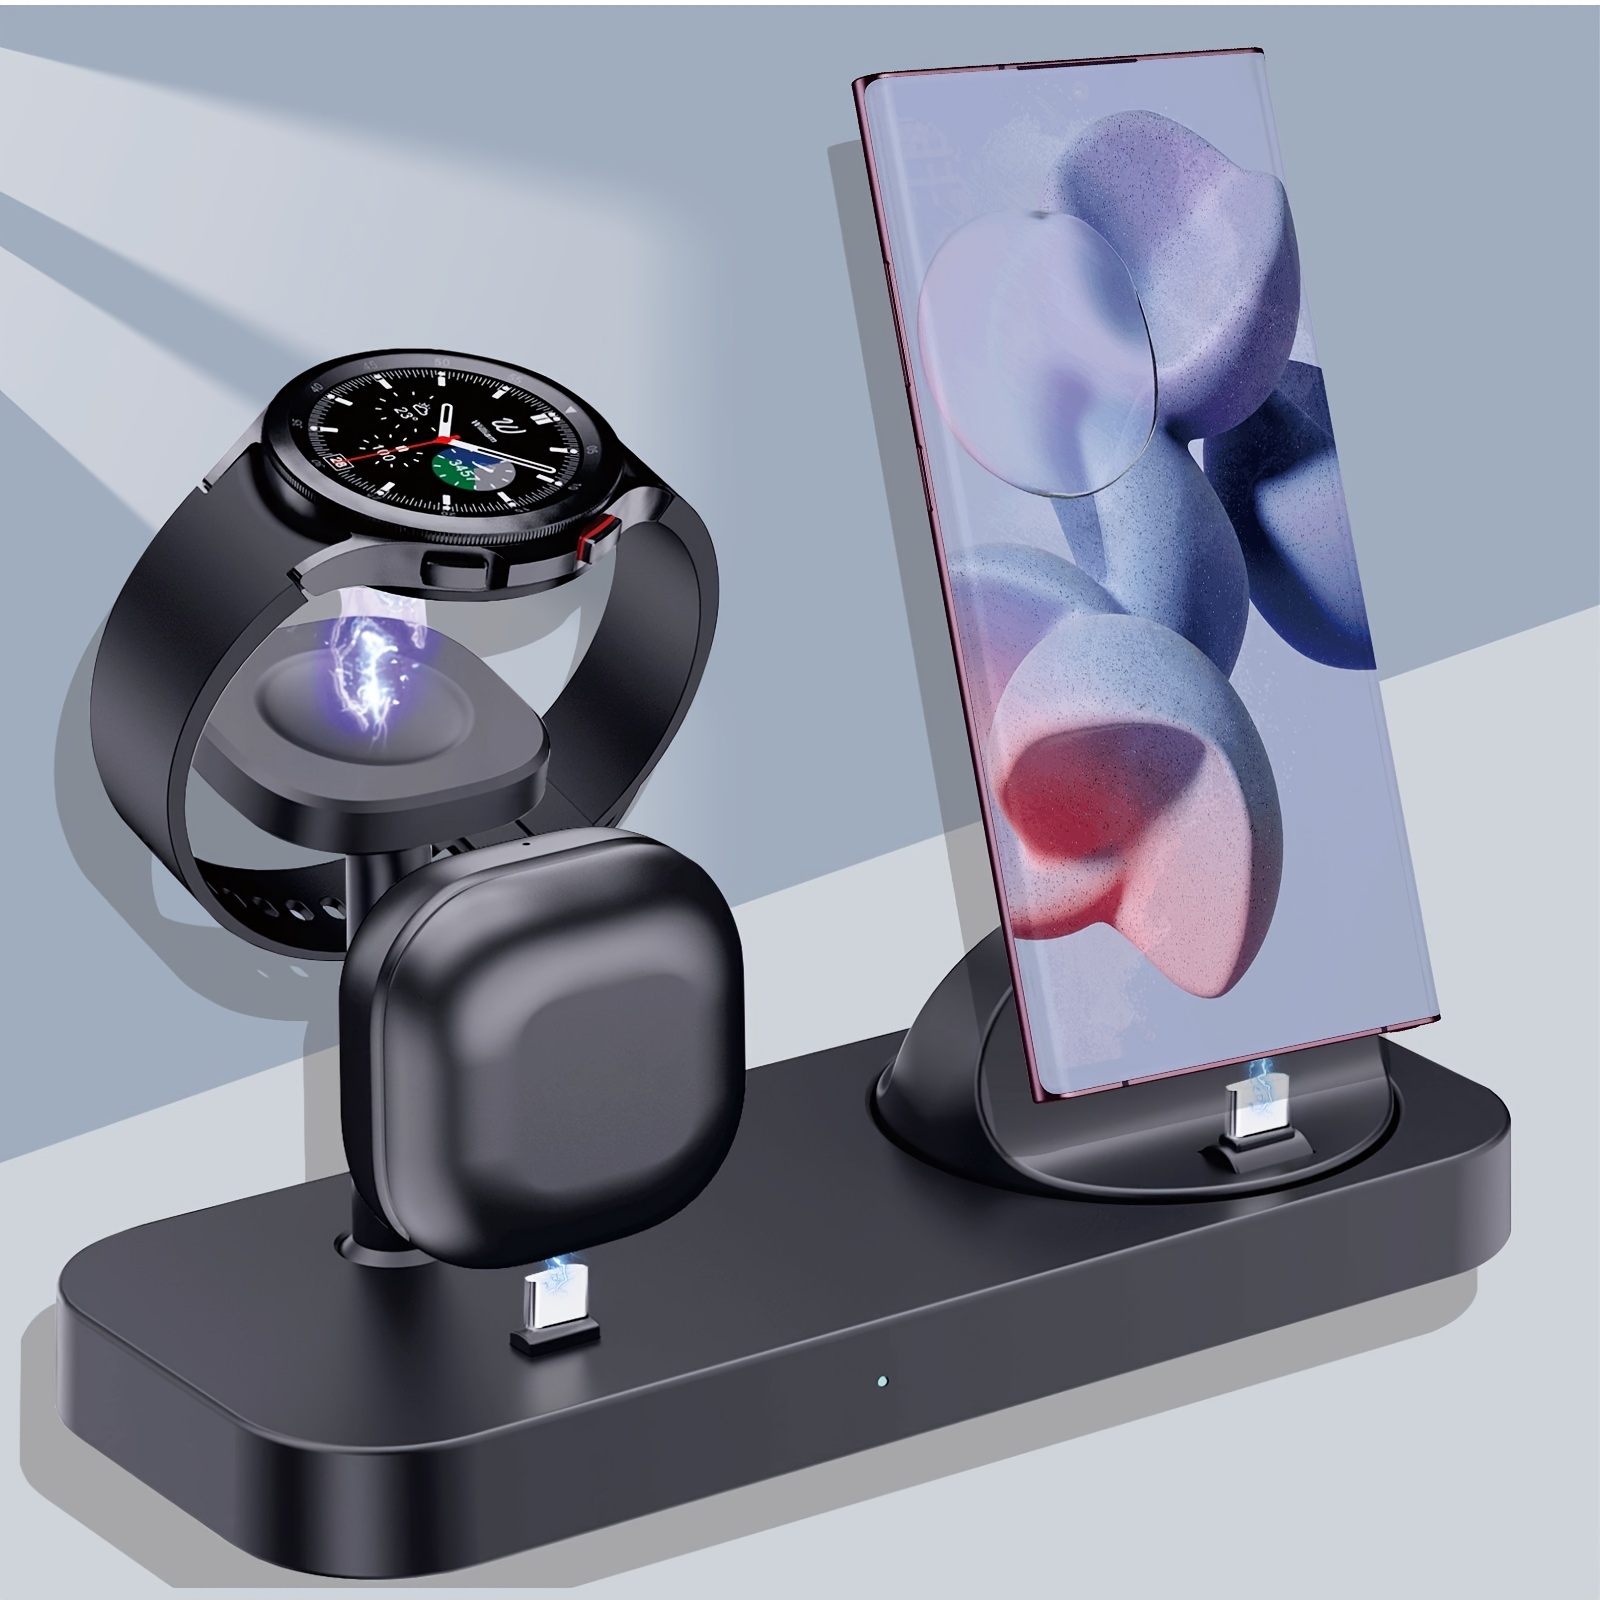 

Wireless Charger Android 4 In 1 Charging Station For Samsung Phone Galaxy Z Flip 5/4/3 Z Fold 5/4/3 S24/s23 S22 S20 Ultra, Galaxy Watch 6/5/4/3 Galaxy Buds